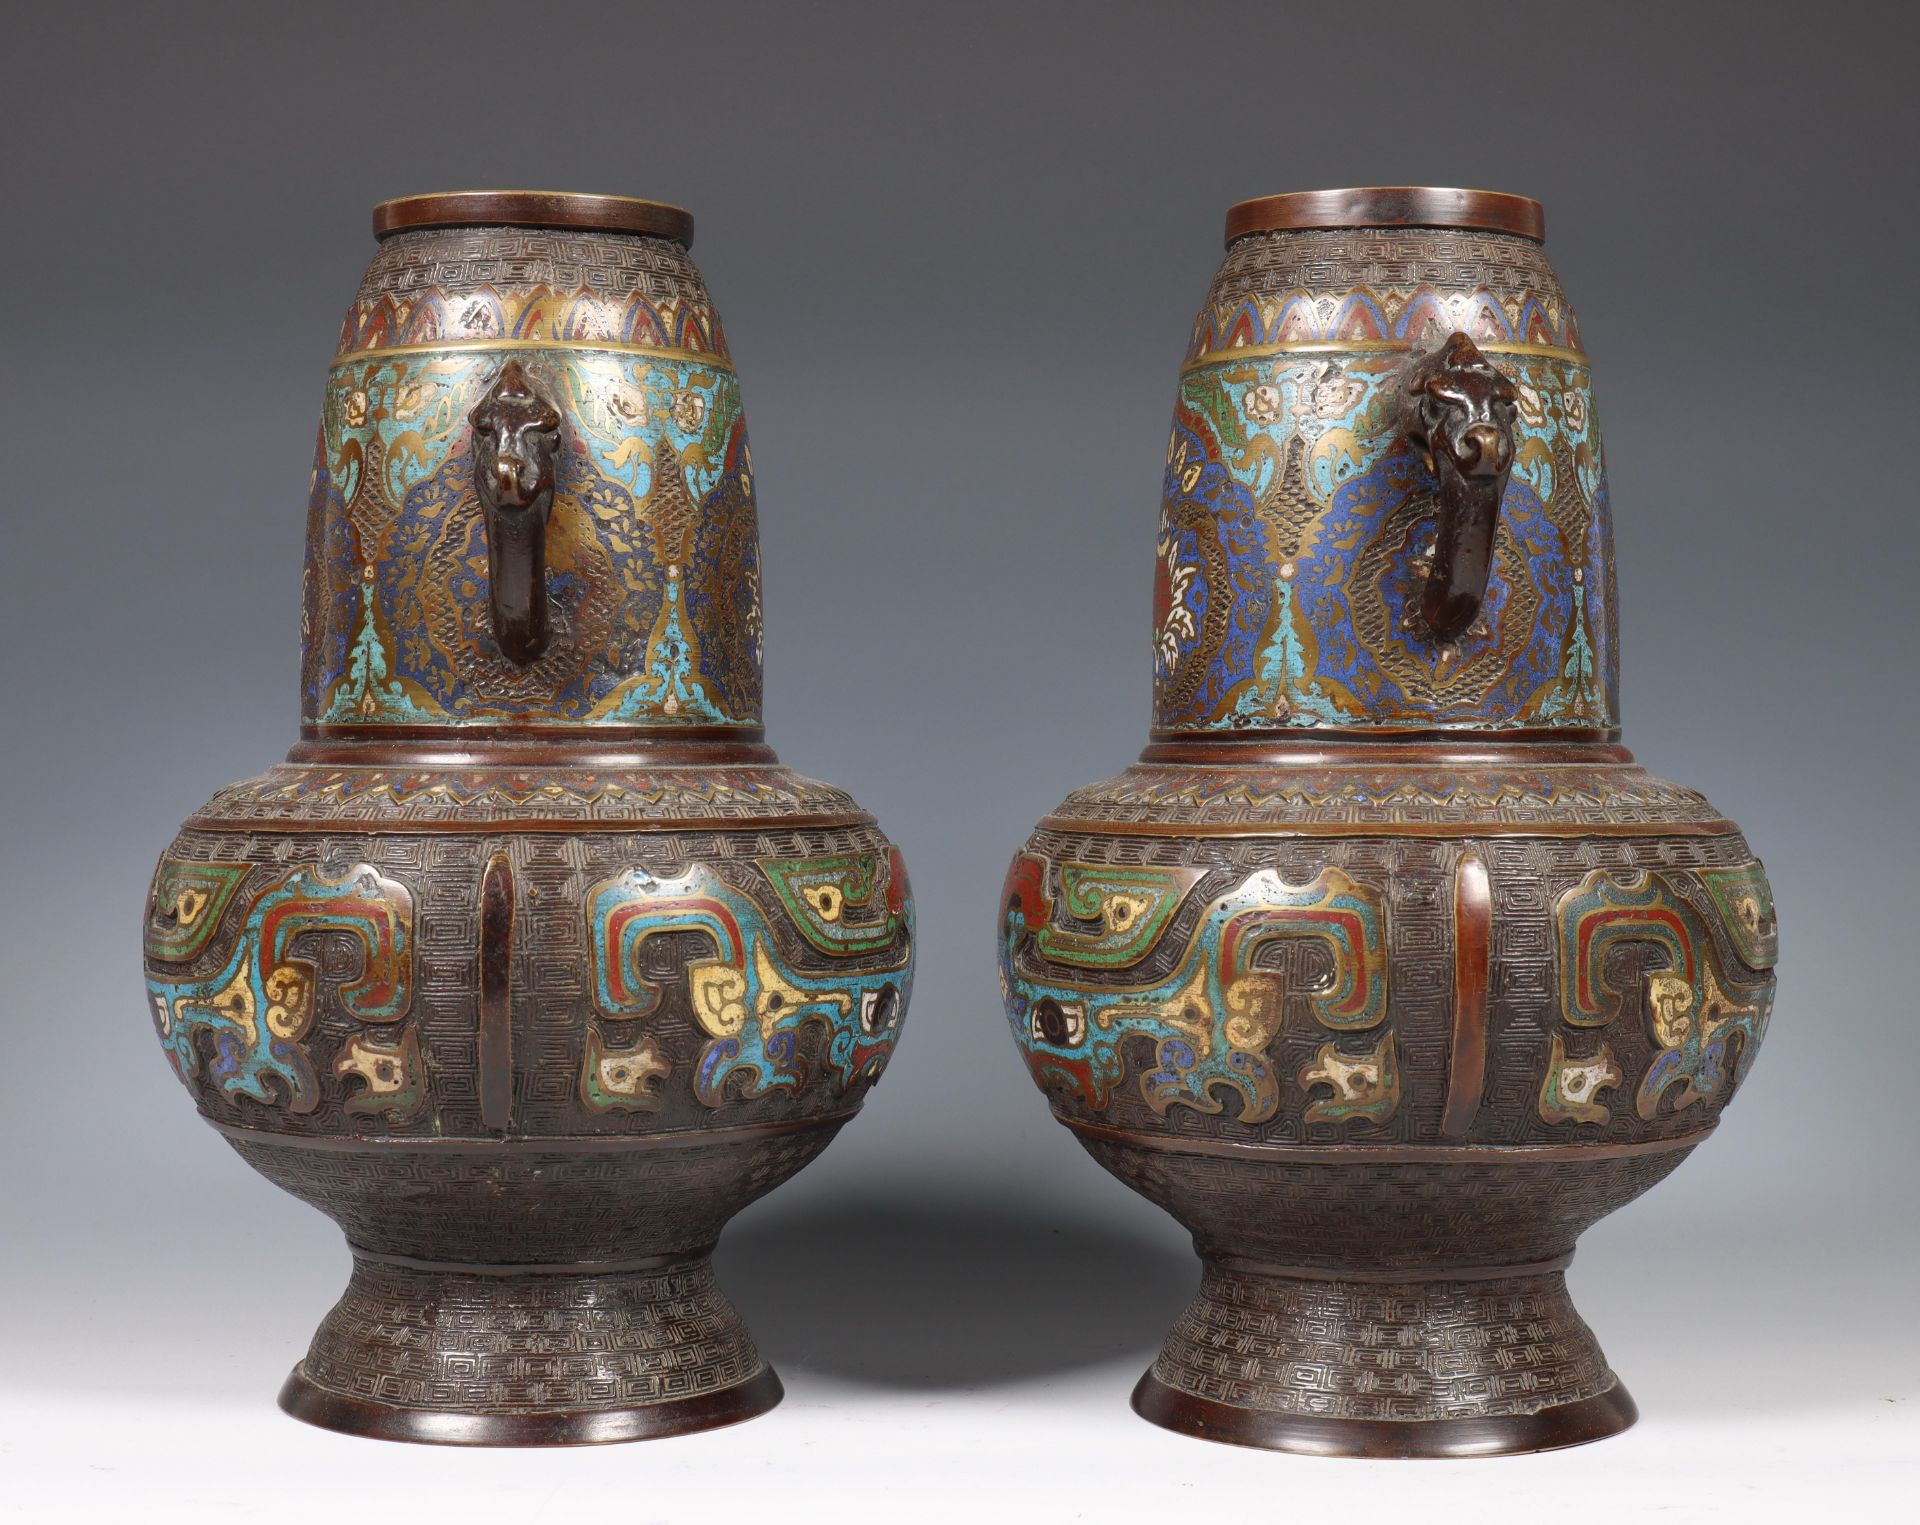 China, pair of bronze cloisonné vases, early 20th century, both with elephant-head handles - Image 5 of 5